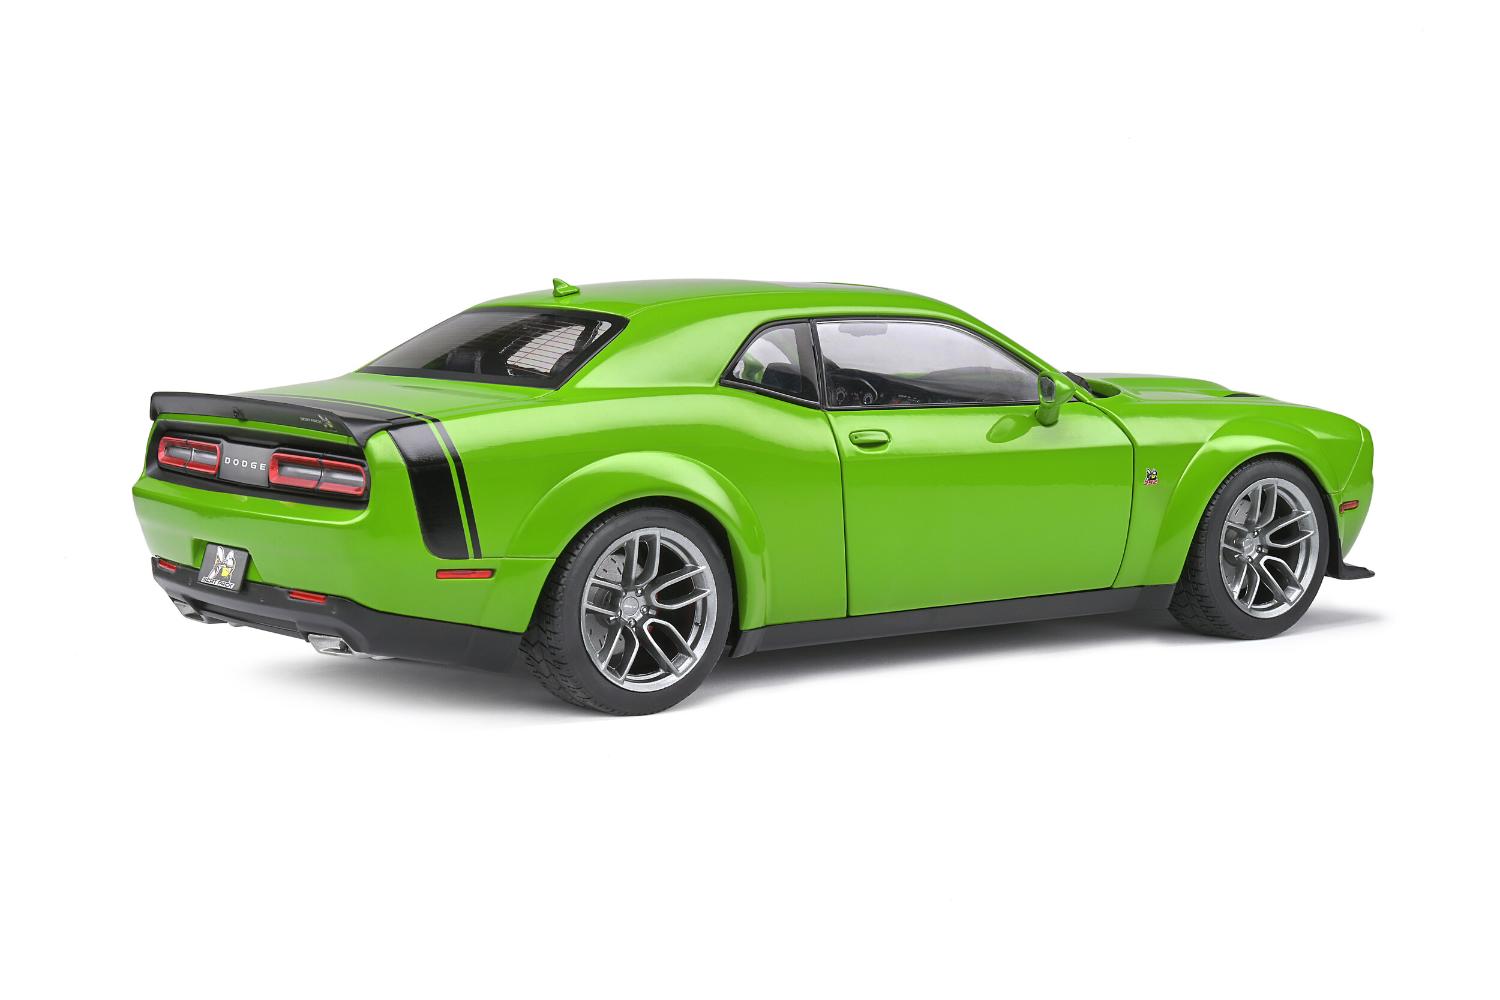 Dodge Challenger SRT Widebody R/T Scat Pack 2020 in green 1:18 scale model from Solido